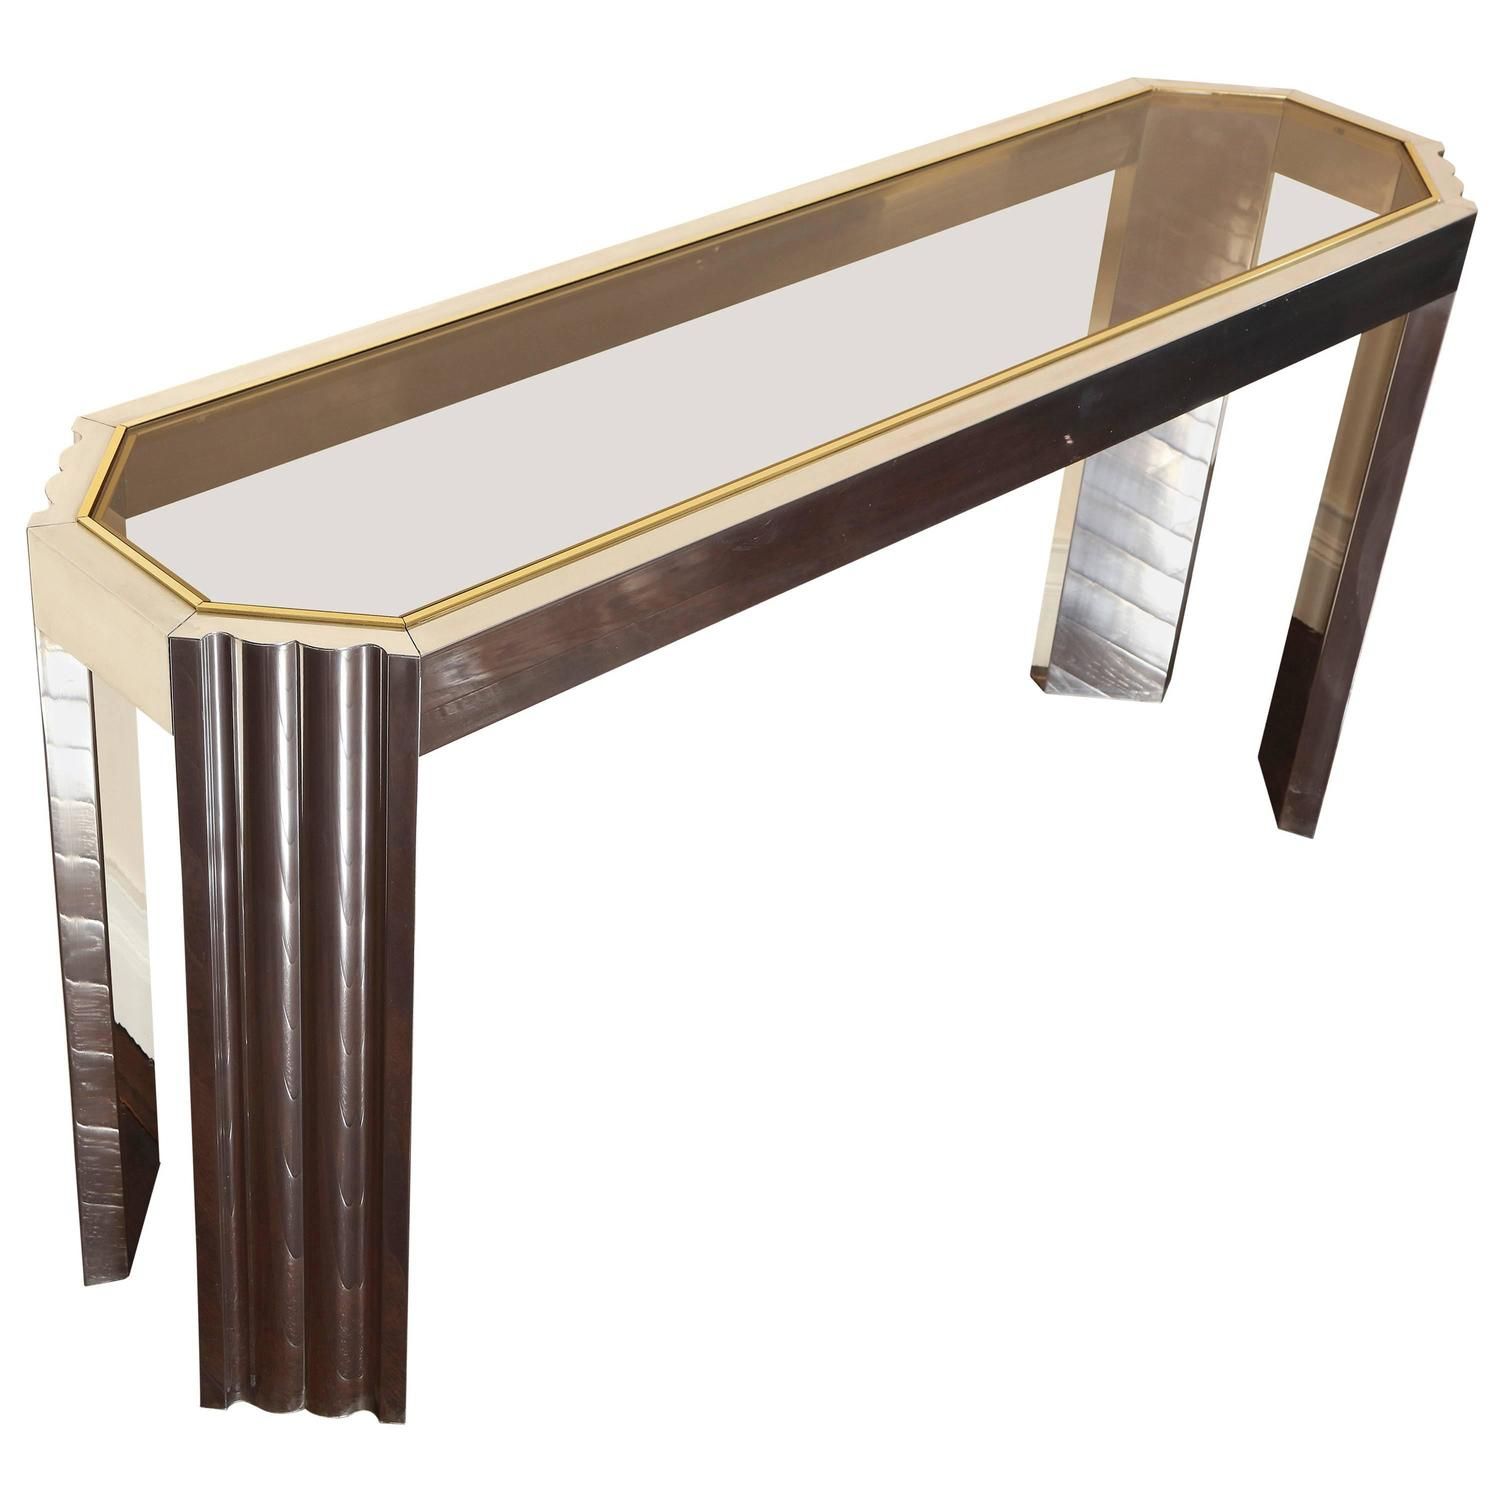 Chrome And Brass 1970s Console Table With Inset Smoked Regarding Chrome And Glass Rectangular Console Tables (View 5 of 20)